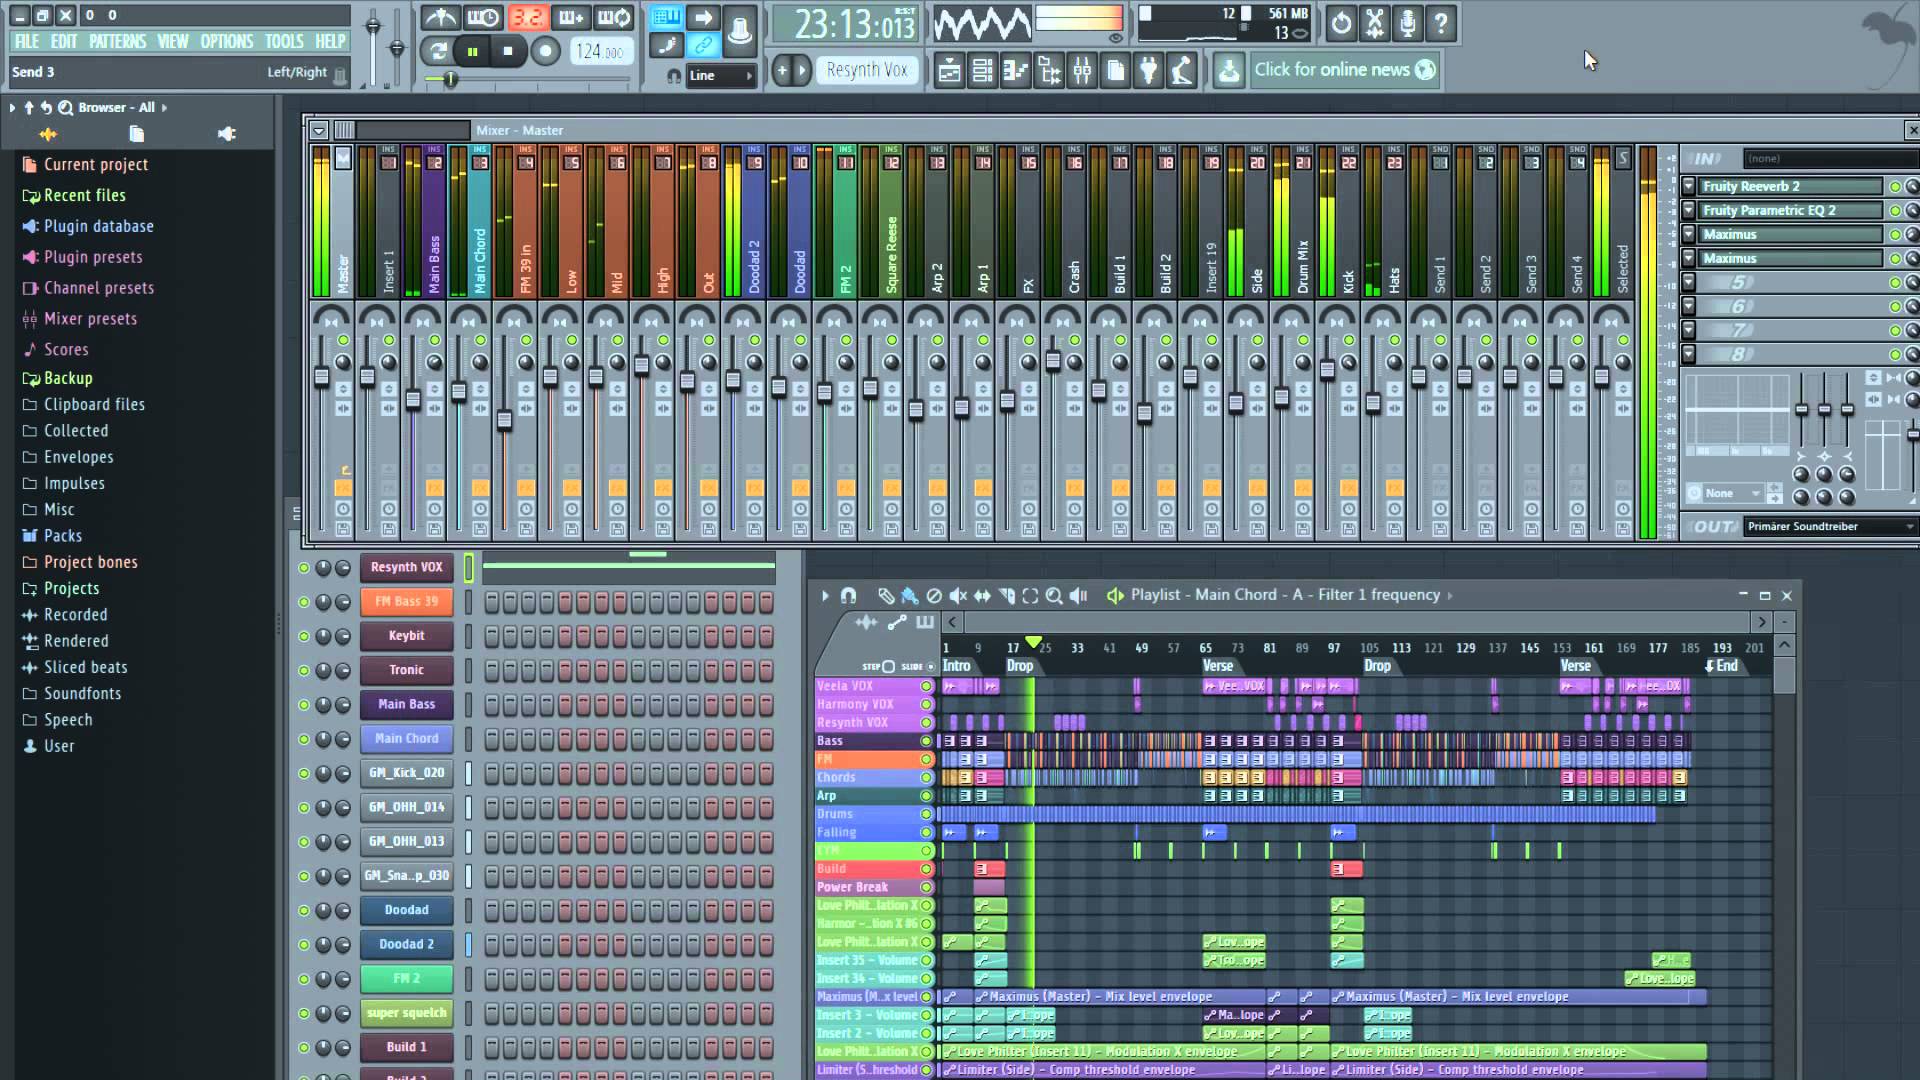 How to download the full version of fl studio 12 for mac free